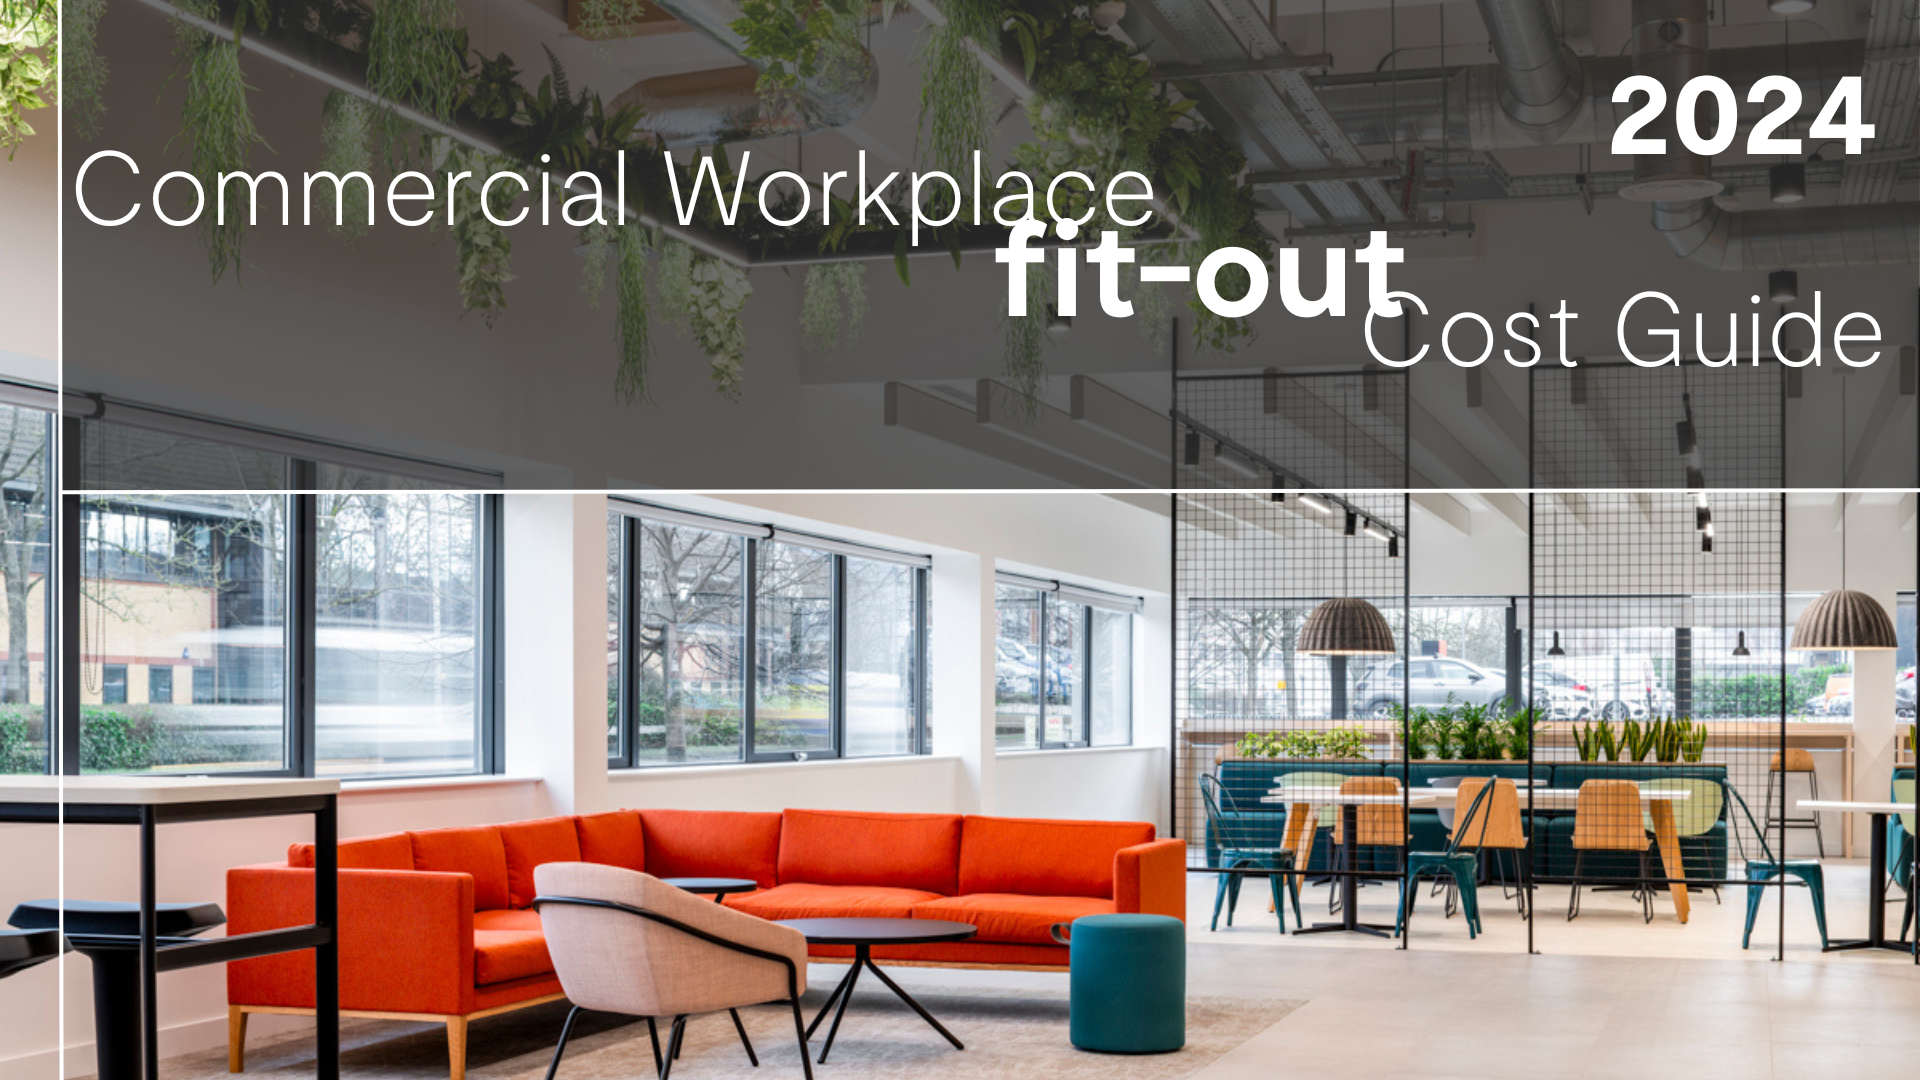 Commercial Workplace Guide